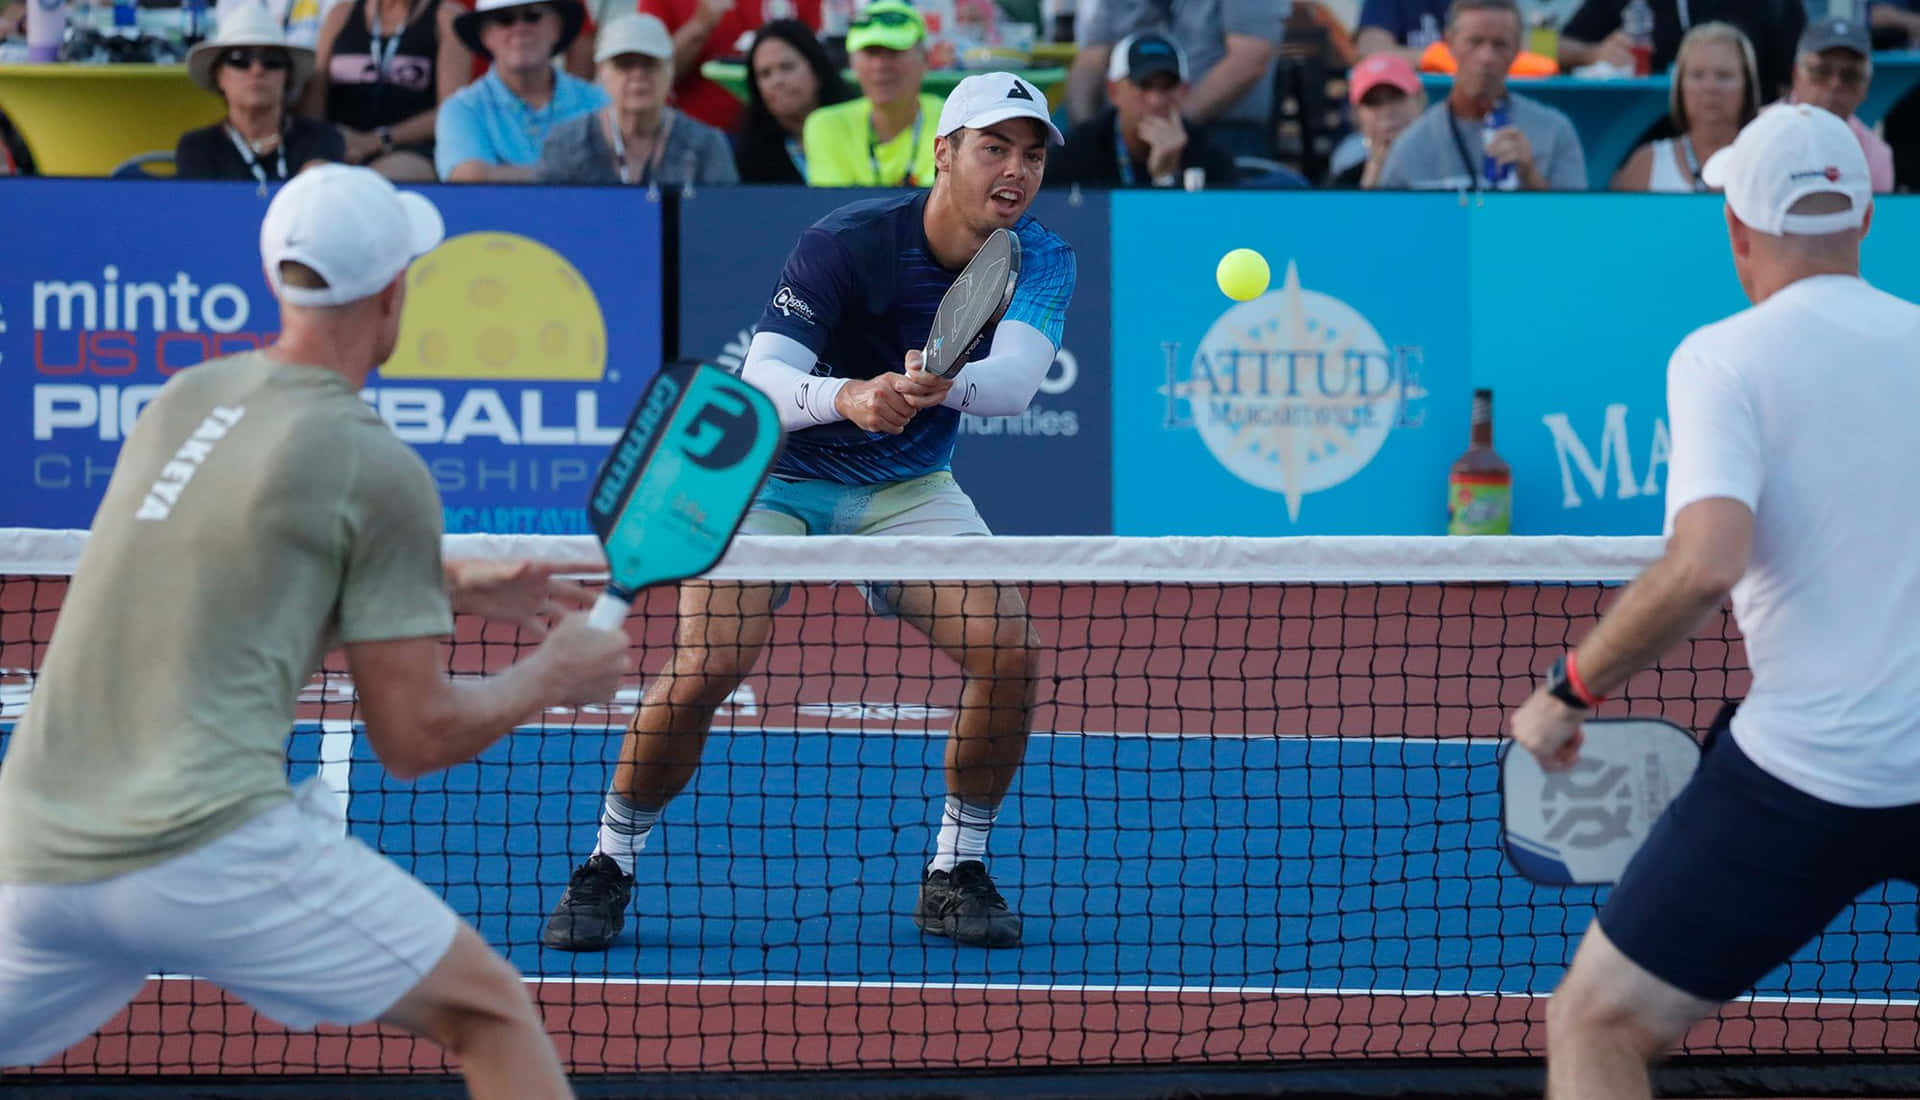 Three Men Playing Tennis In Front Of A Crowd